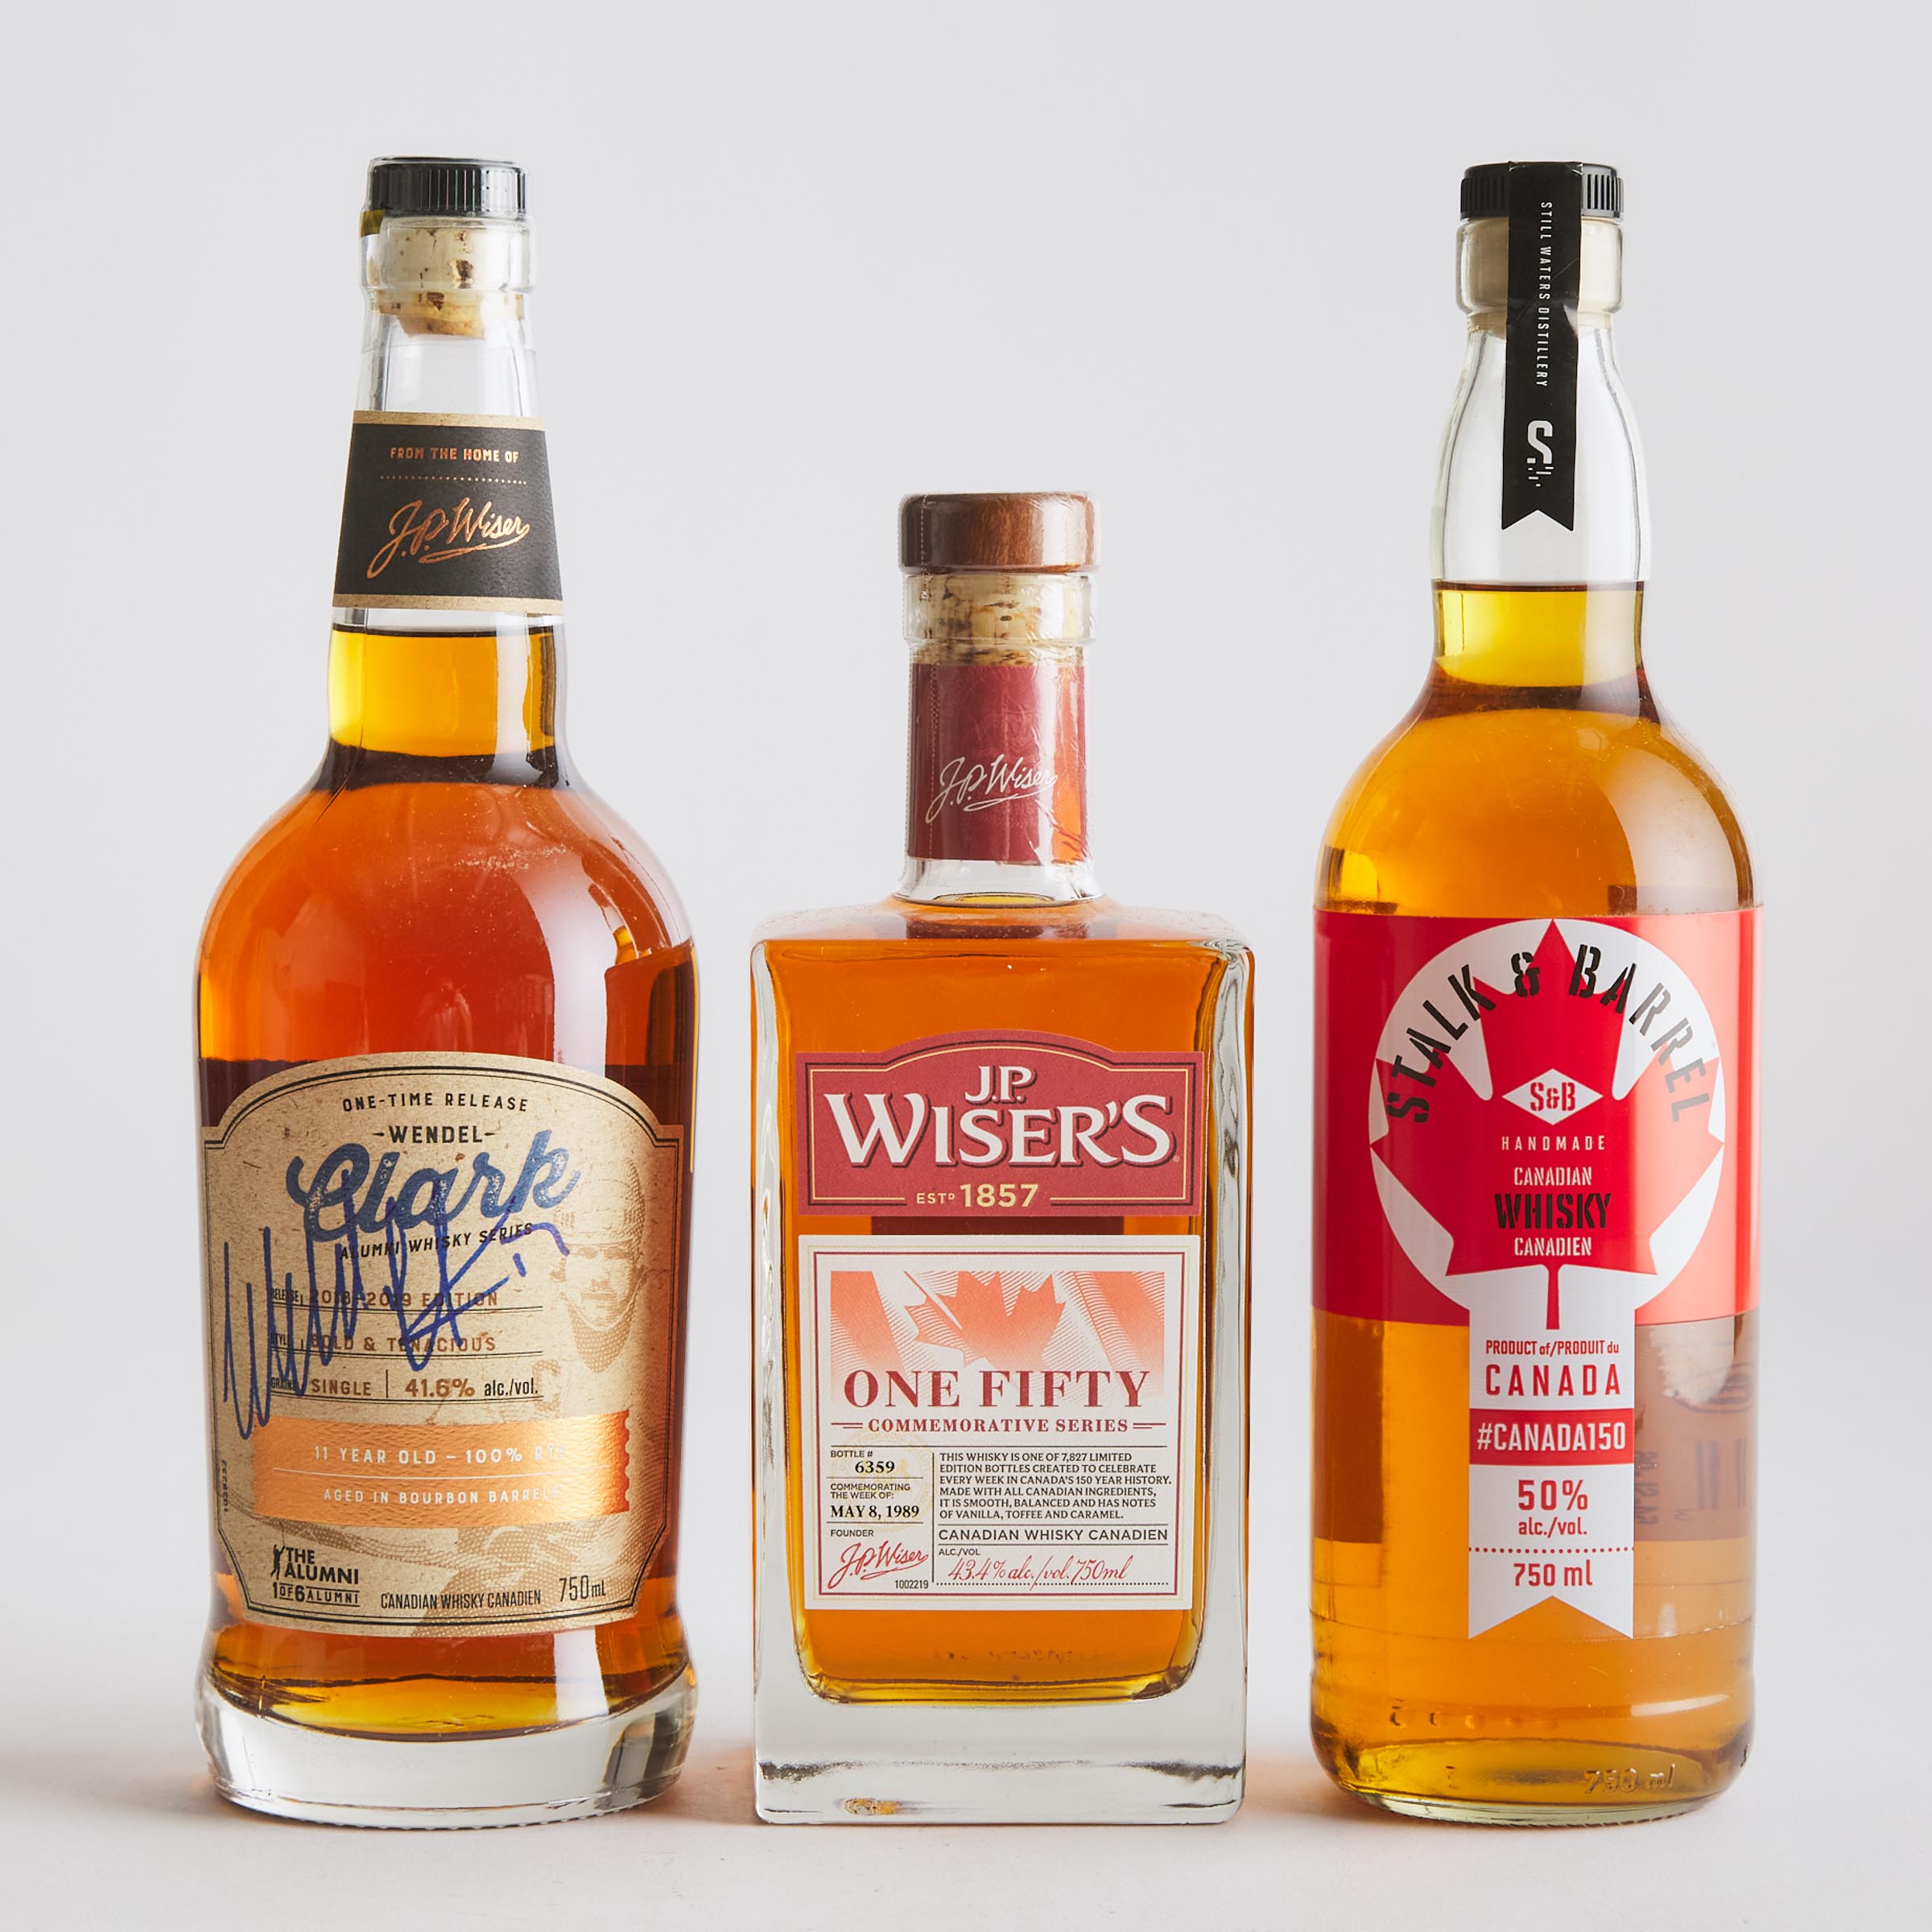 J.P. WISER'S CANADIAN WHISKY (ONE 750 ML)
J.P. WISER'S WENDEL CLARKE CANADIAN WHISKY 11 YEARS (ONE 750 ML)
STALK AND BARREL CANADIAN WHISKY (ONE 750 ML)